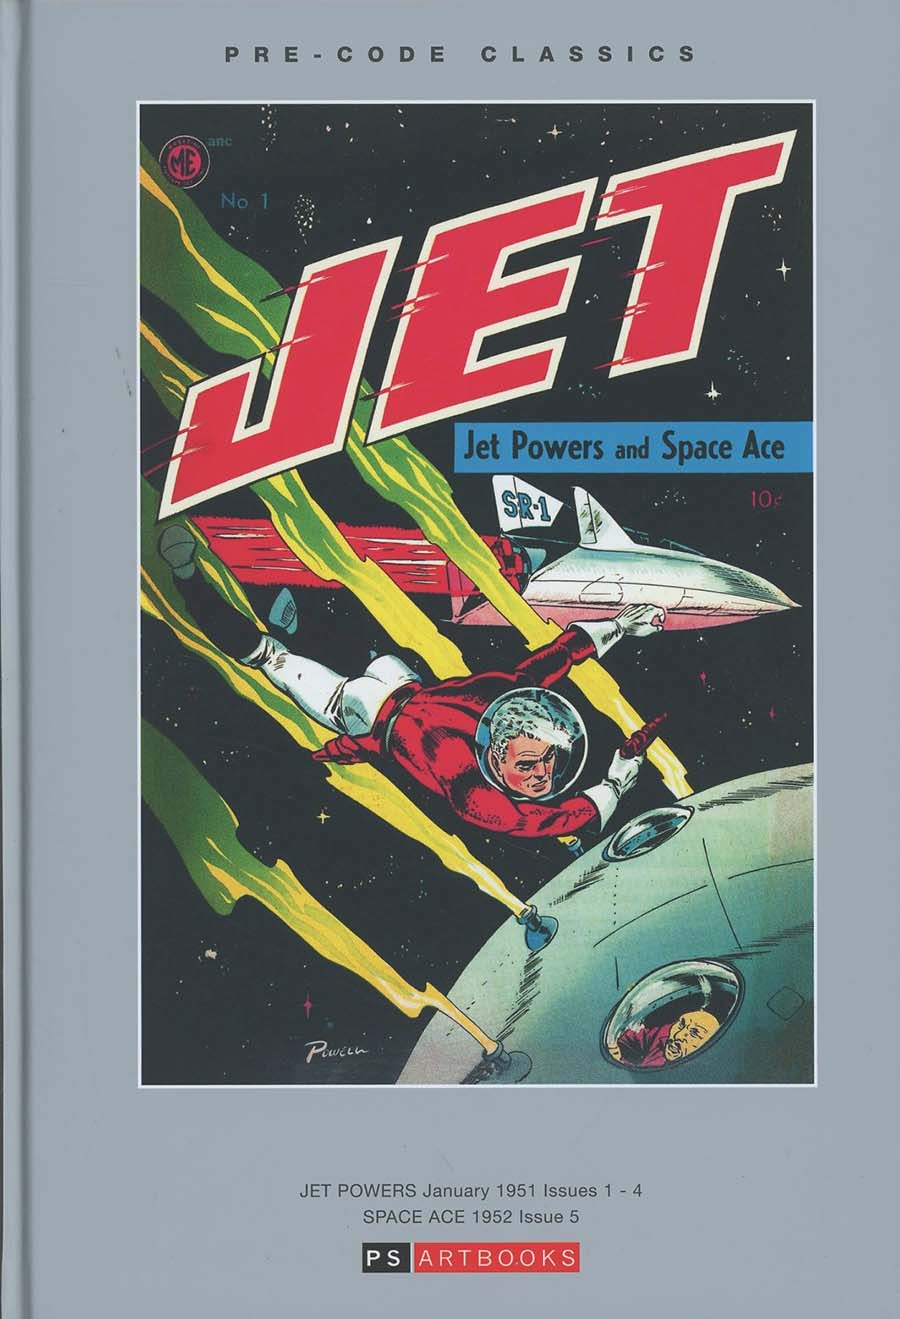 Pre-Code Classics Jet Powers And Space Ace Vol 1 HC Slipcase Edition